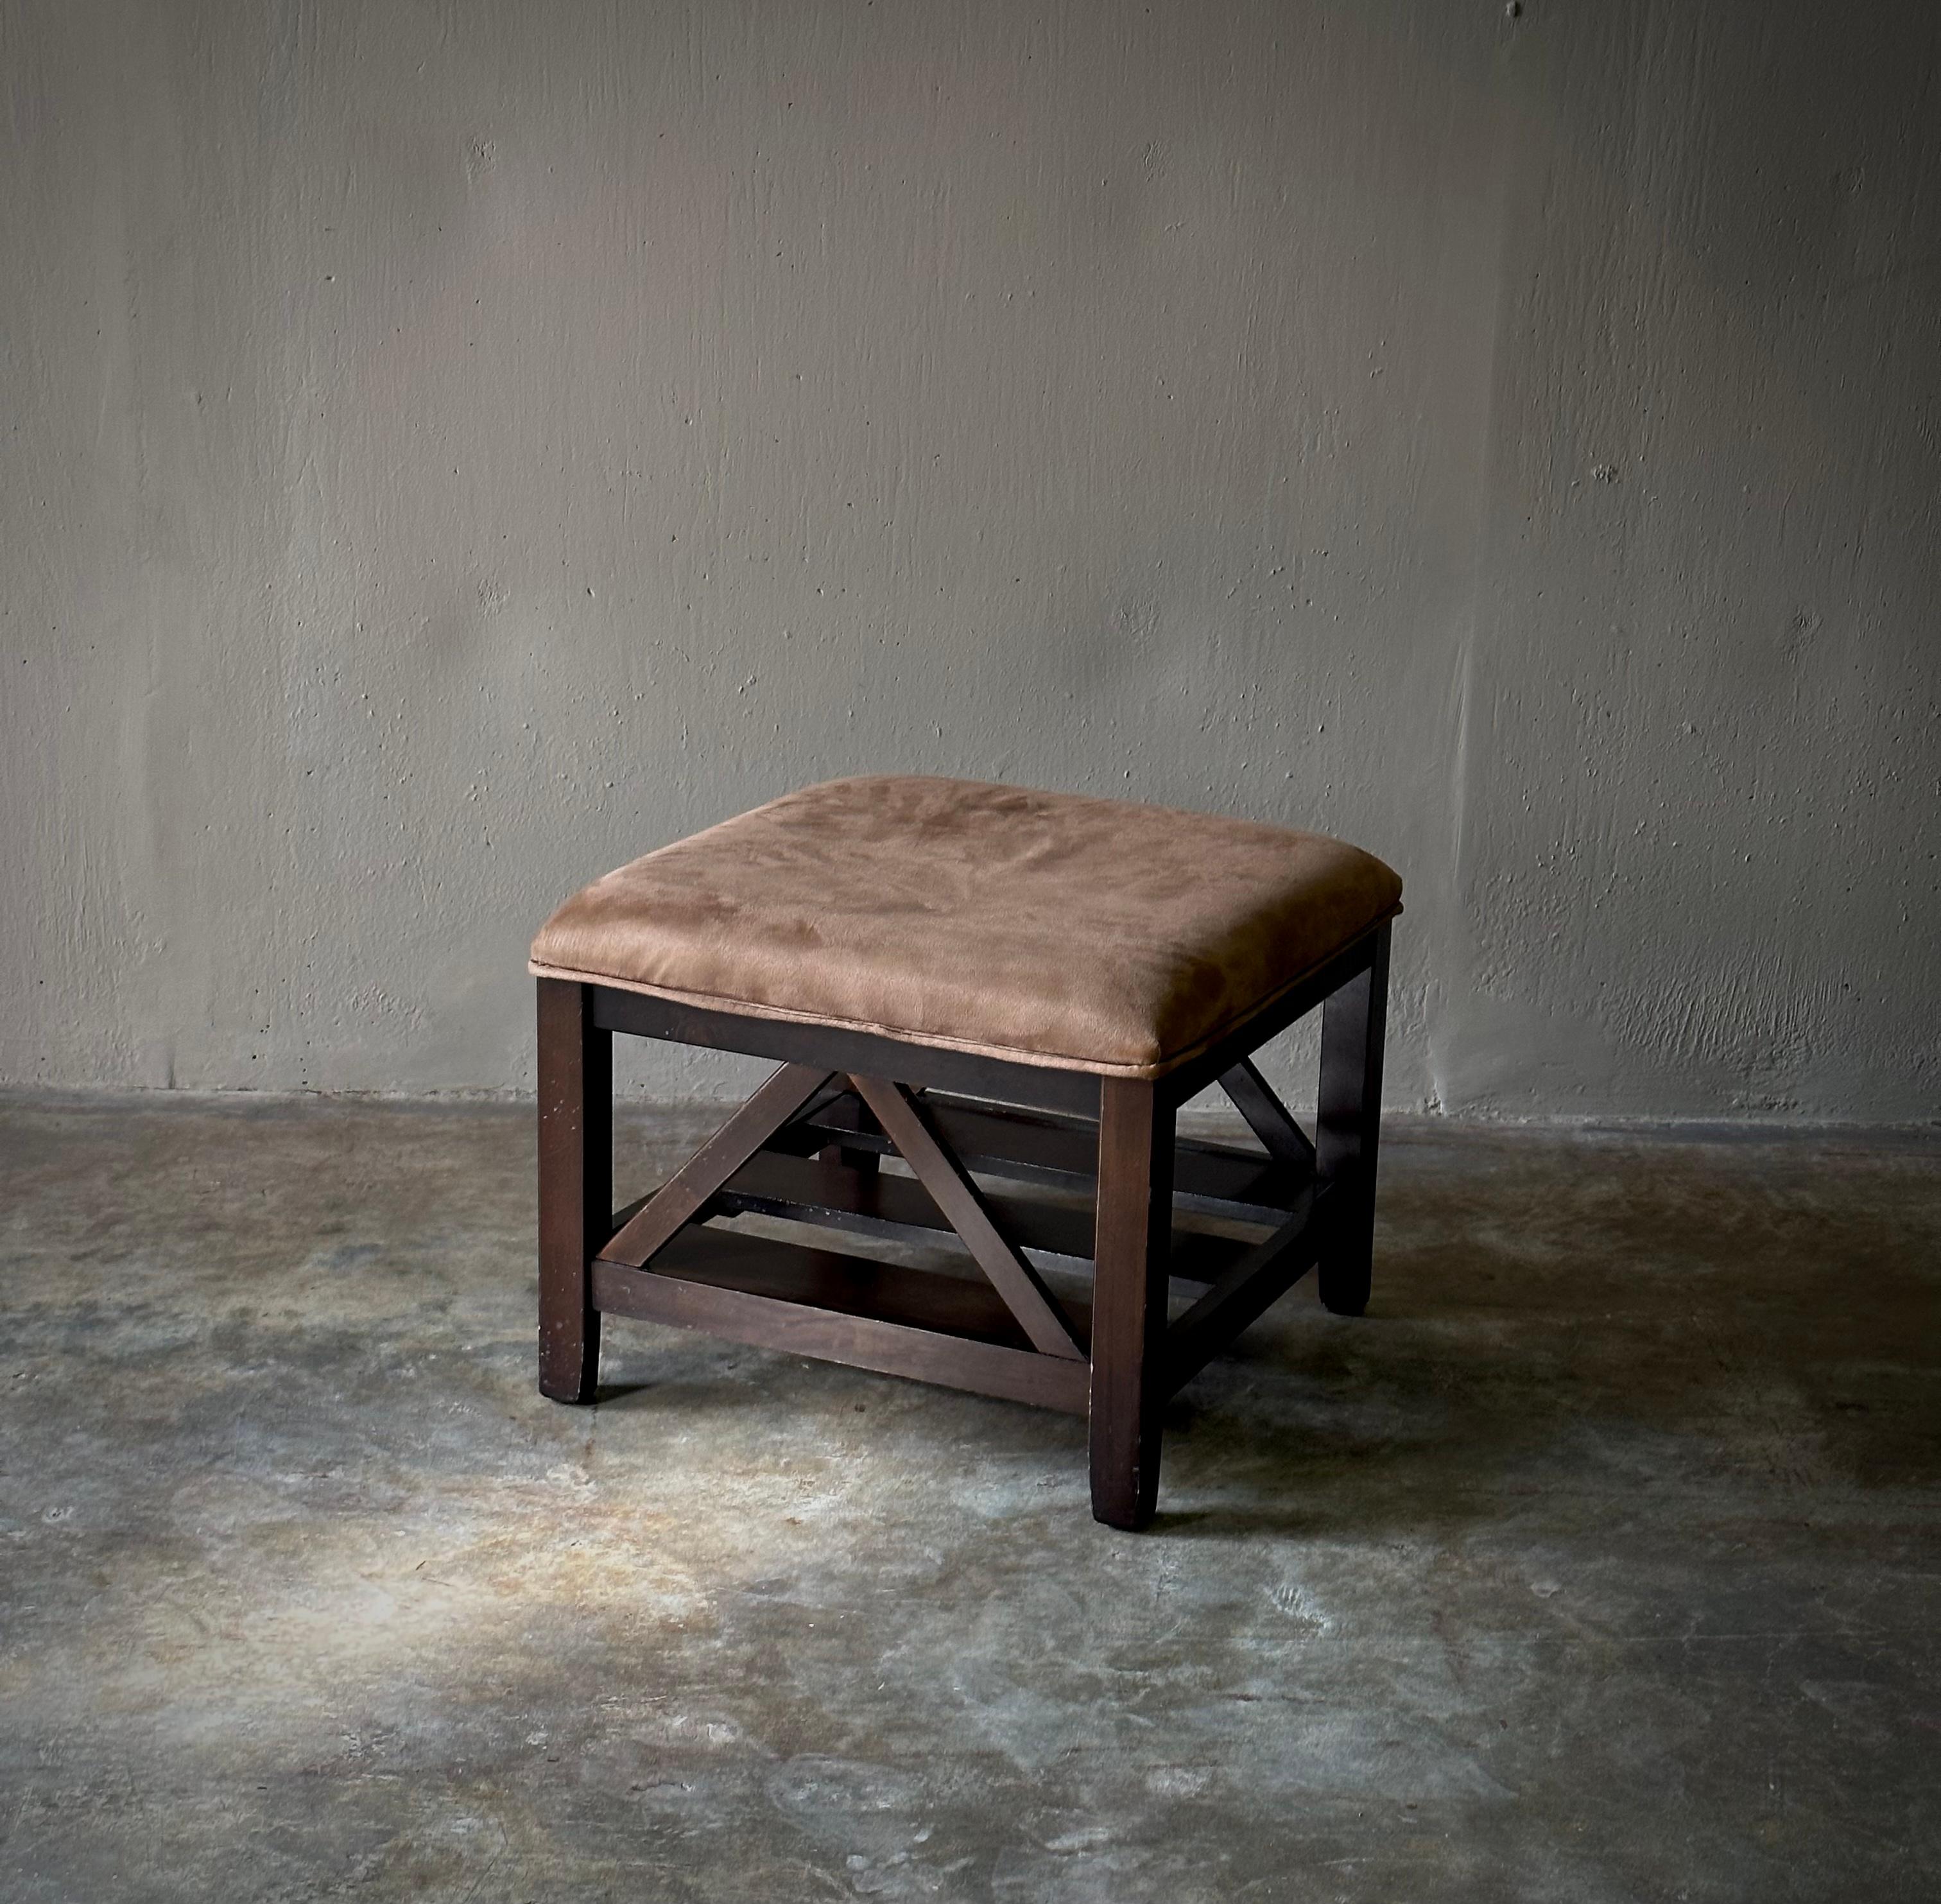 1940s Belgian stool, ottoman or small bench with beautiful original taupe leather upholstered top and dark chocolate stained wooden base. Rustic yet elegant.

Belgium, circa 1940

Dimensions: 20 W x 20 D x 16 H.